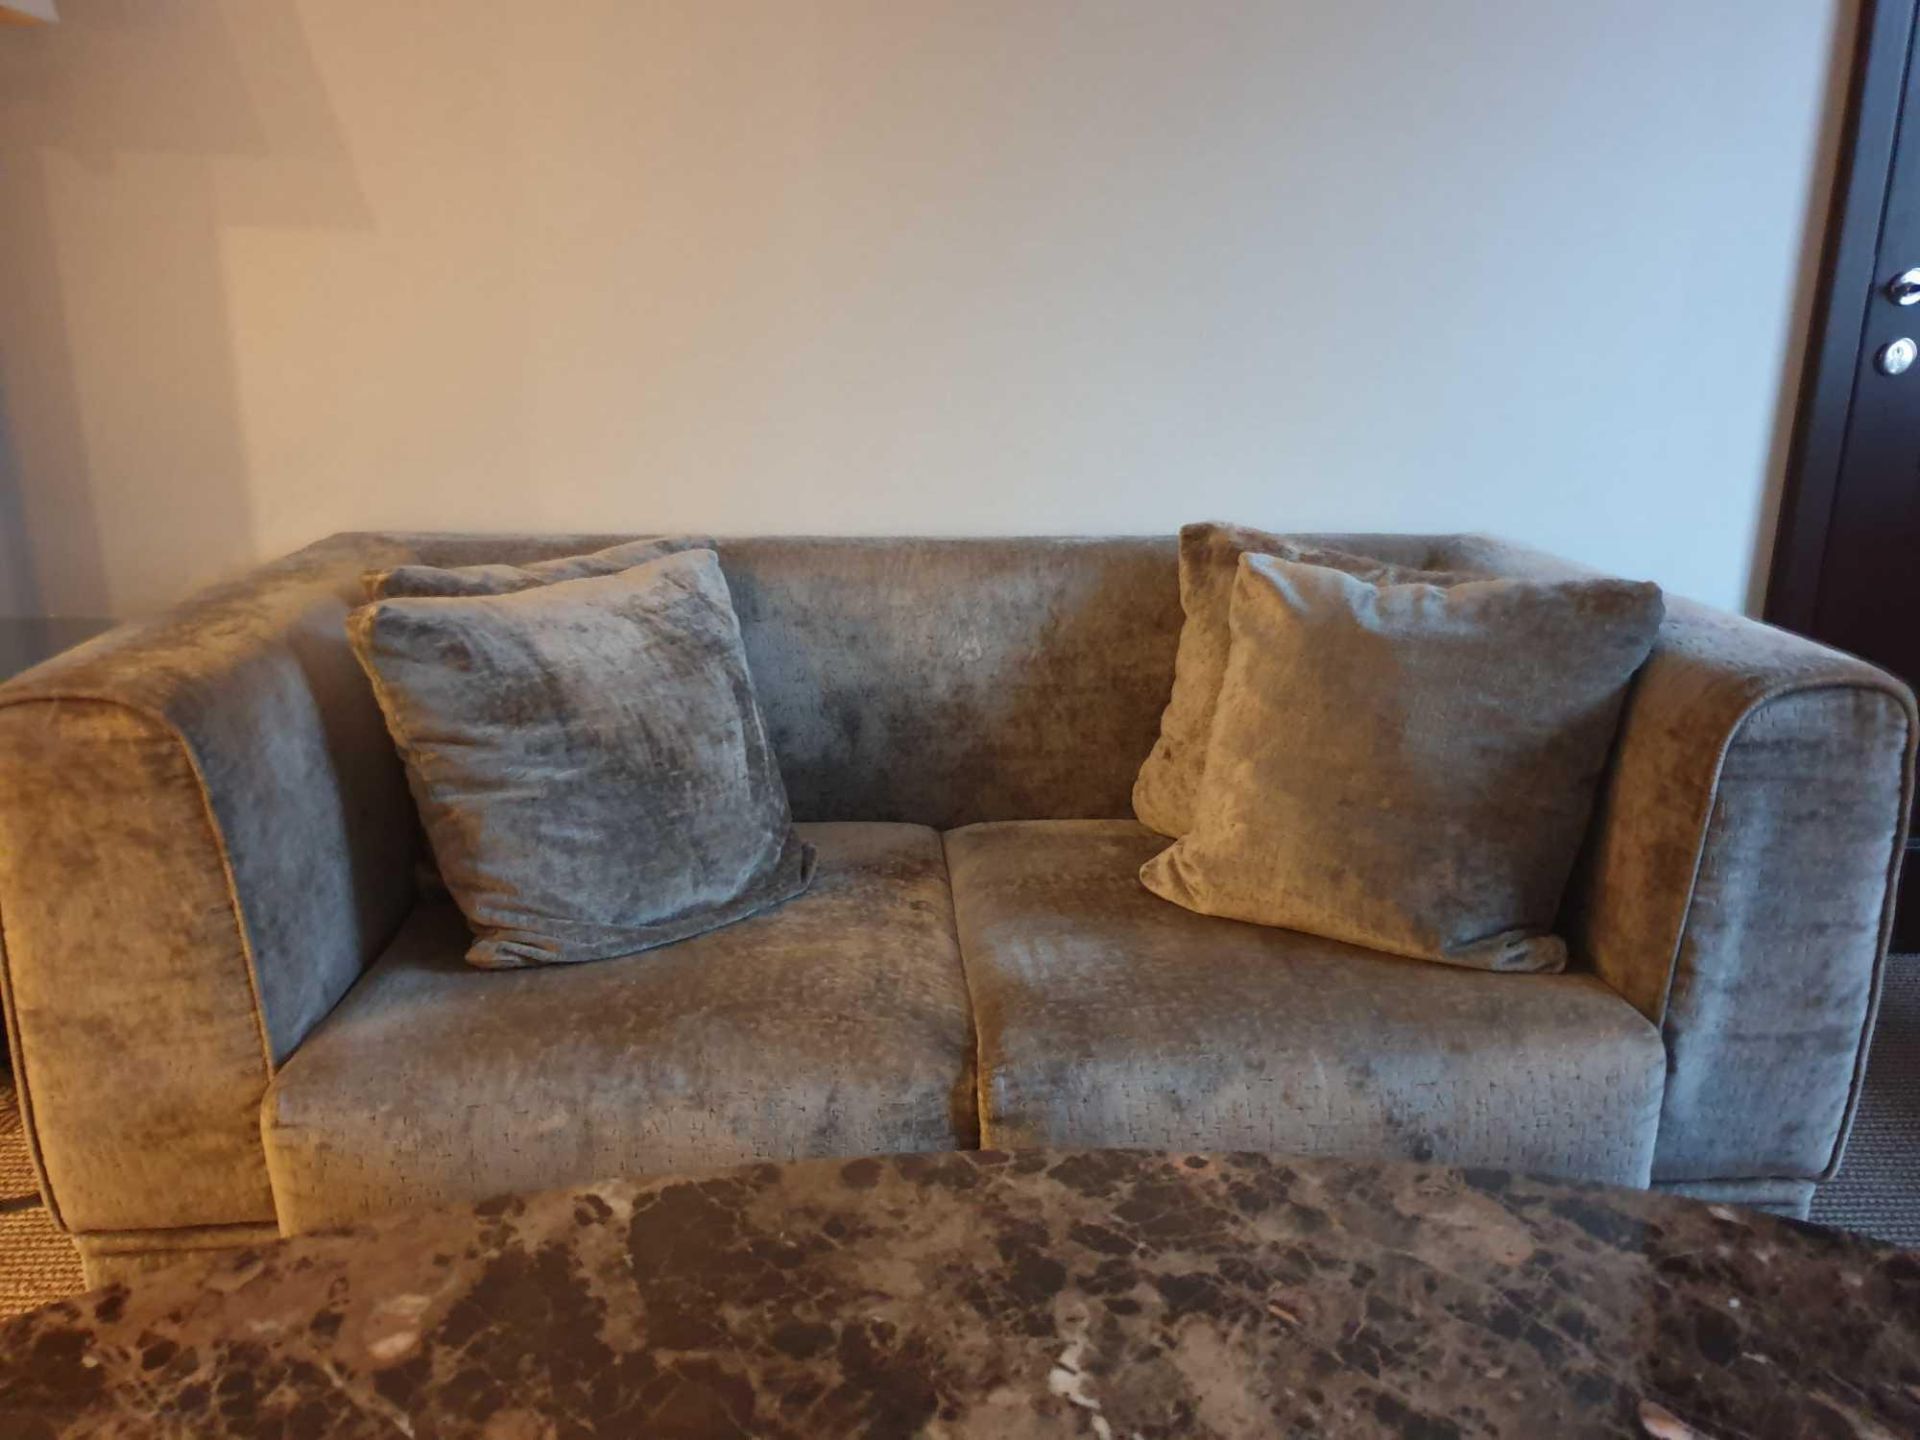 Upholstered Two Seater Velvet Sofa In Silver Silhouette 170 X 90 X 68 ( Loc 441) - Image 3 of 3